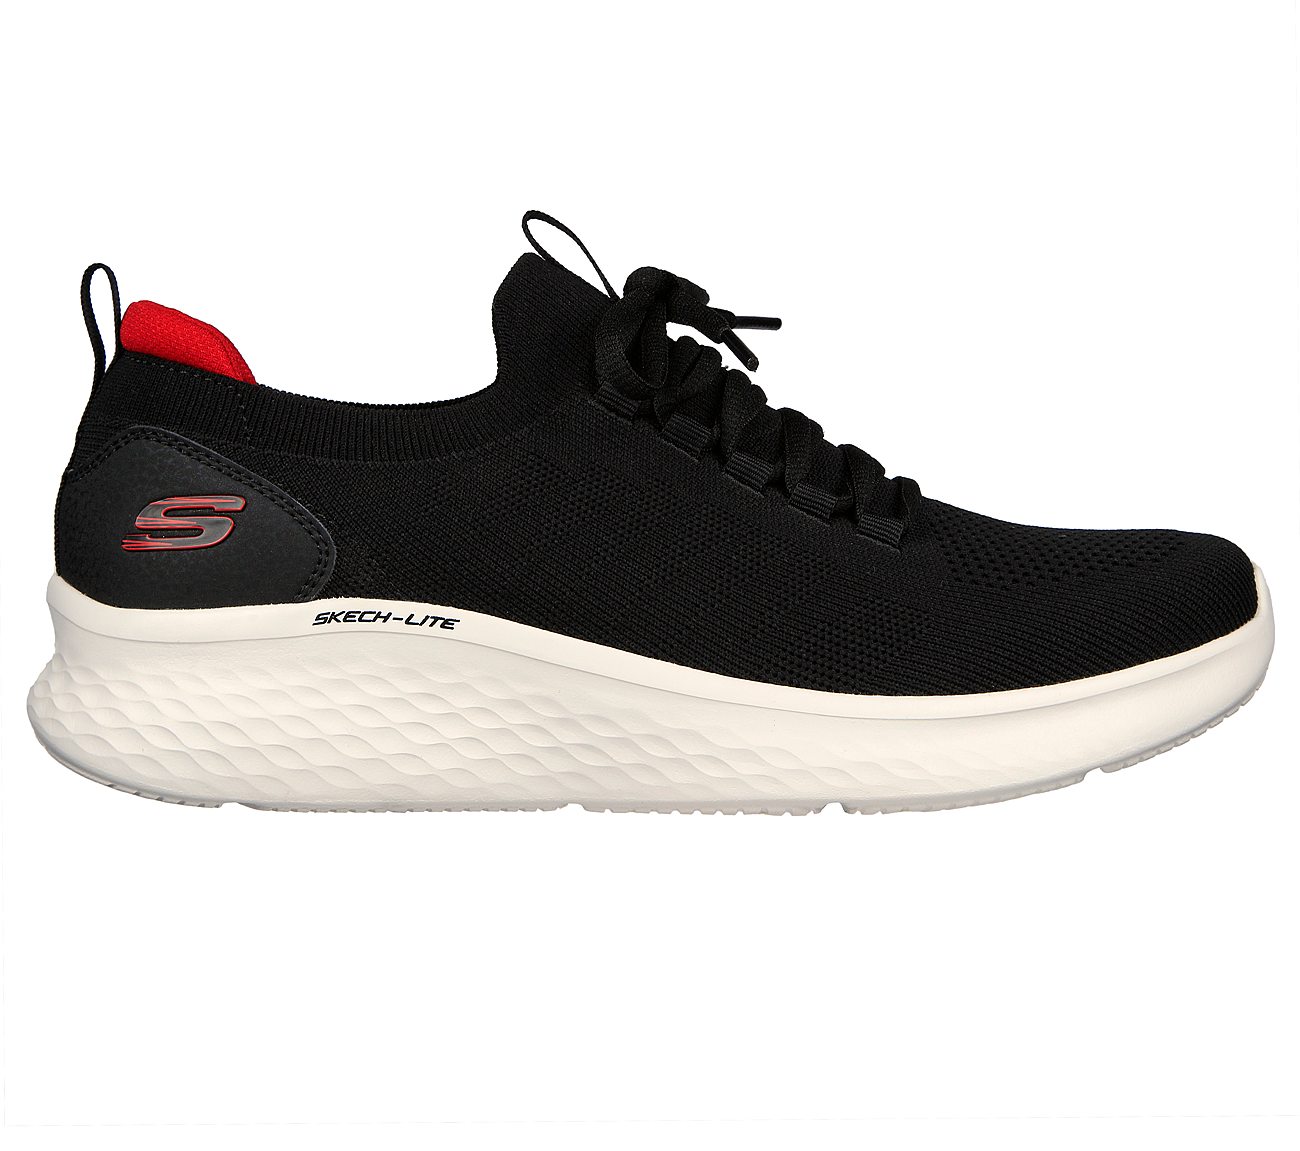 SKECH-LITE PRO - FAINT FLAIR, BLACK/RED Footwear Lateral View